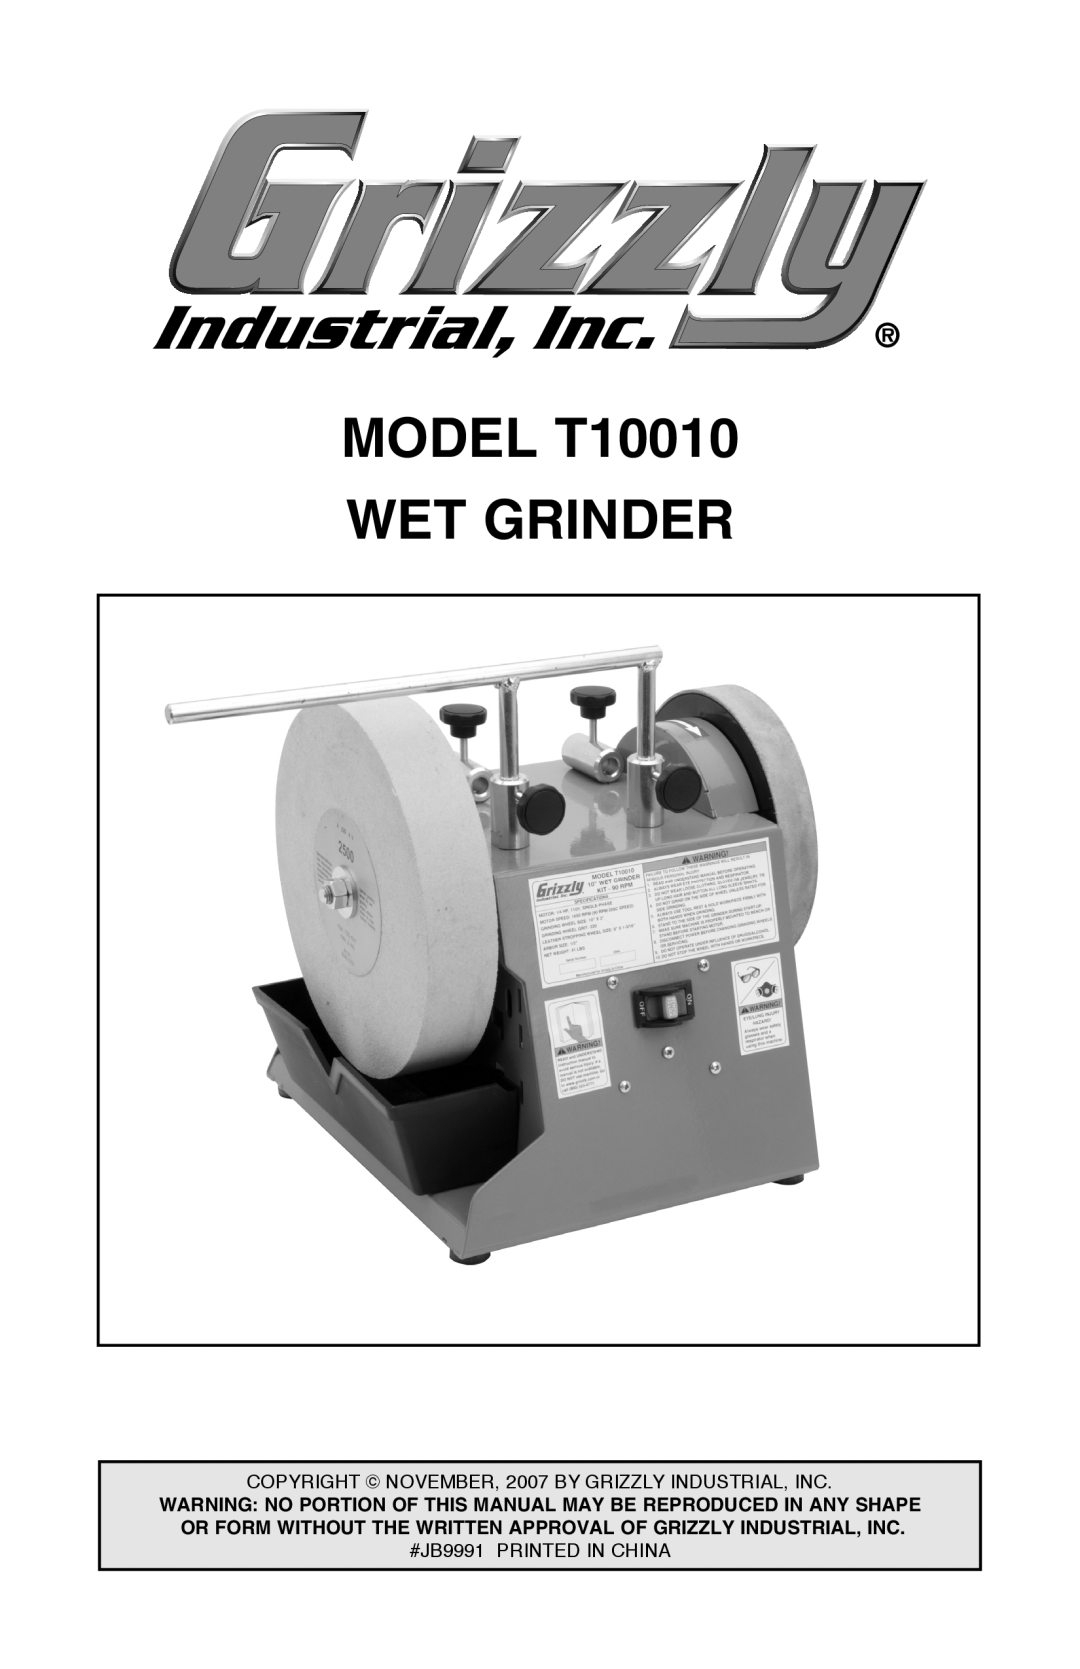 Grizzly manual MODEL T10010, Wet Grinder, COPYRIGHT NOVEMBER, 2007 BY GRIZZLY INDUSTRIAL, INC, #JB9991 PRINTED IN CHINA 